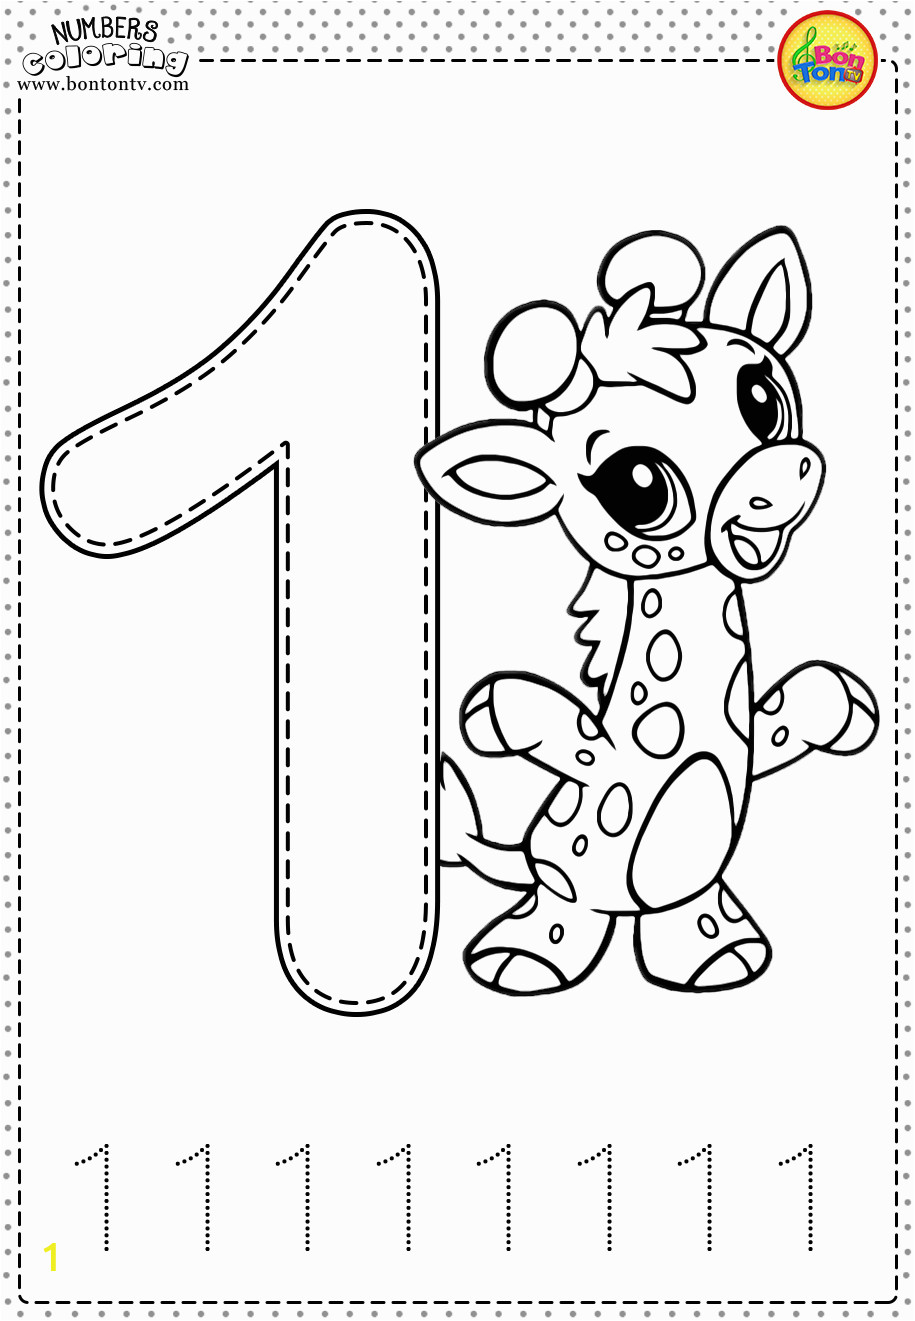 Coloring Pages Printables with Numbers Number 1 Preschool Printables Free Worksheets and Coloring